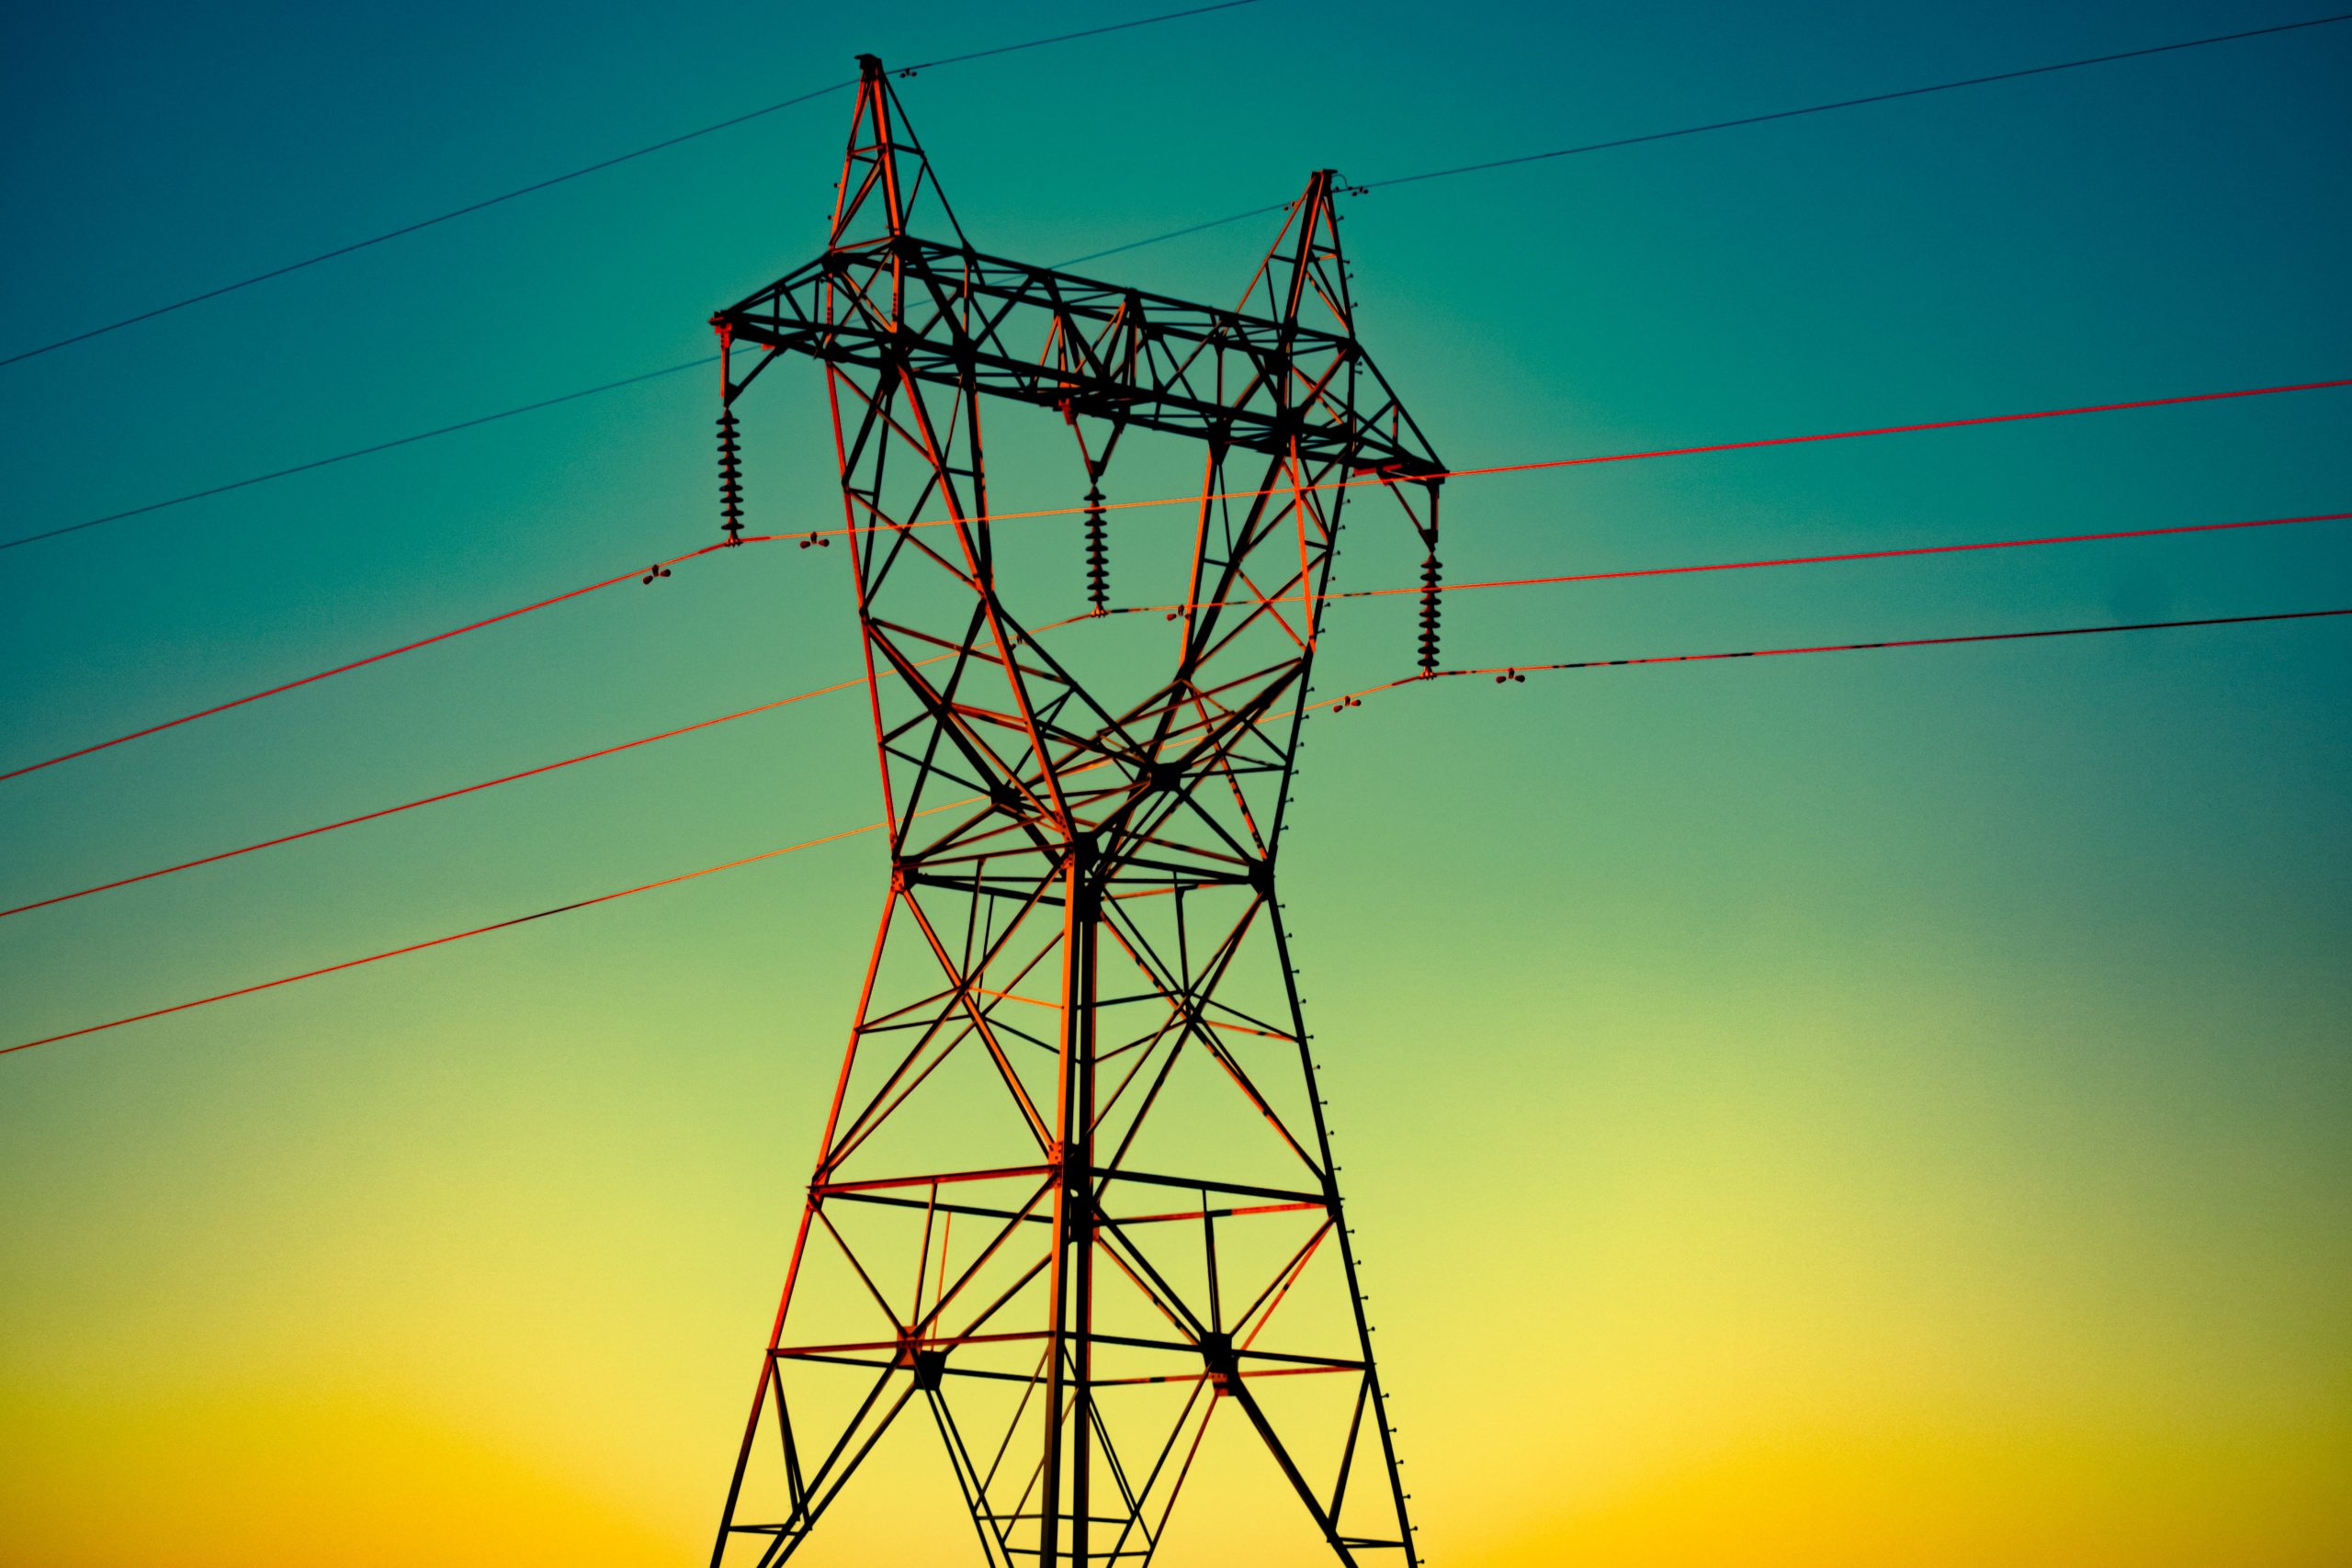 Indonesia applies smart grids to achieve national energy mix